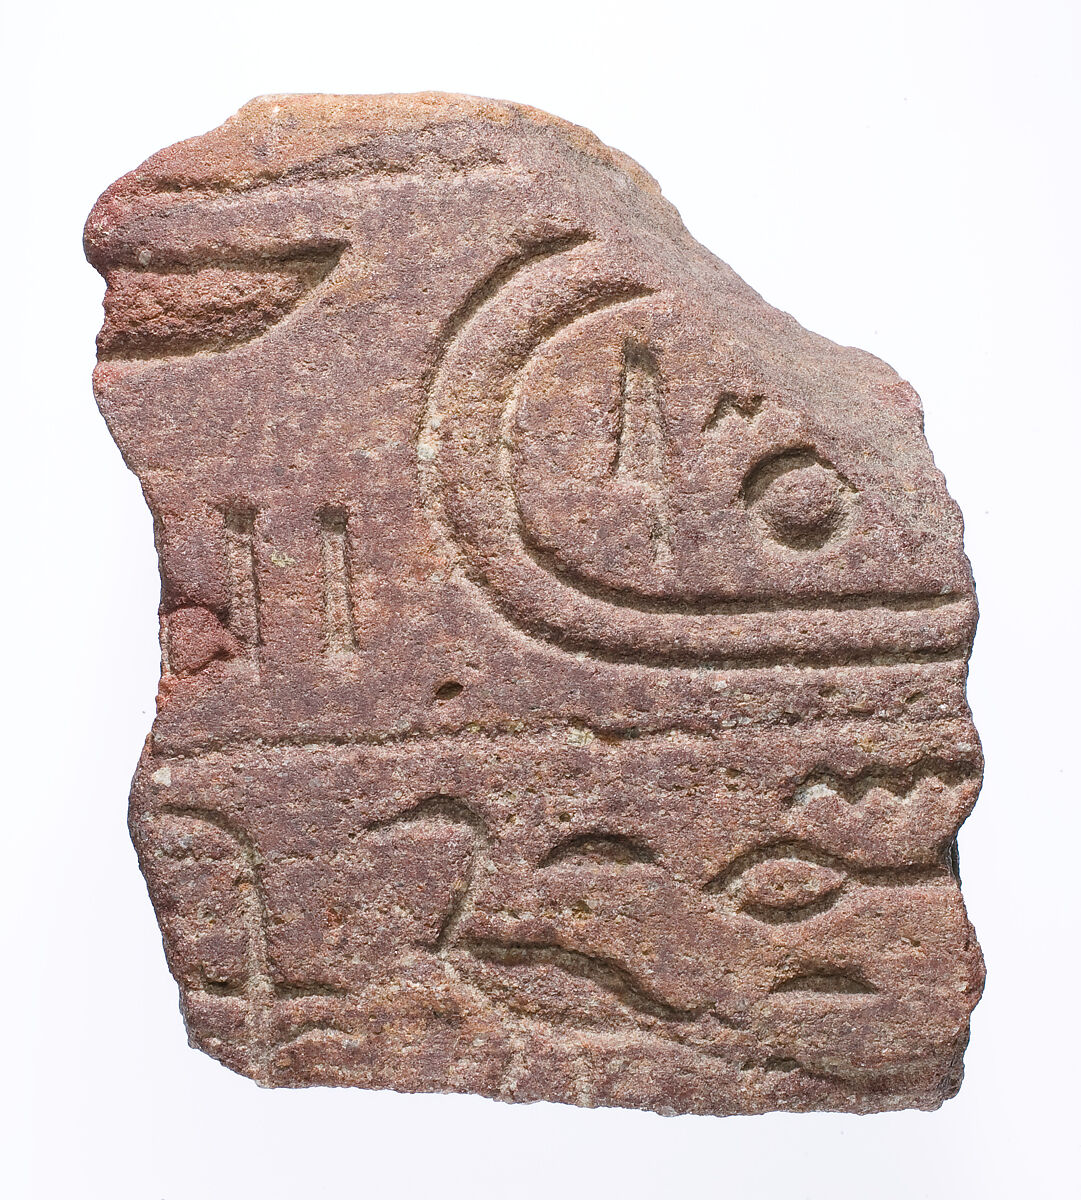 Element with name of Akhenaten and titulary of a princess, Red quartzite 